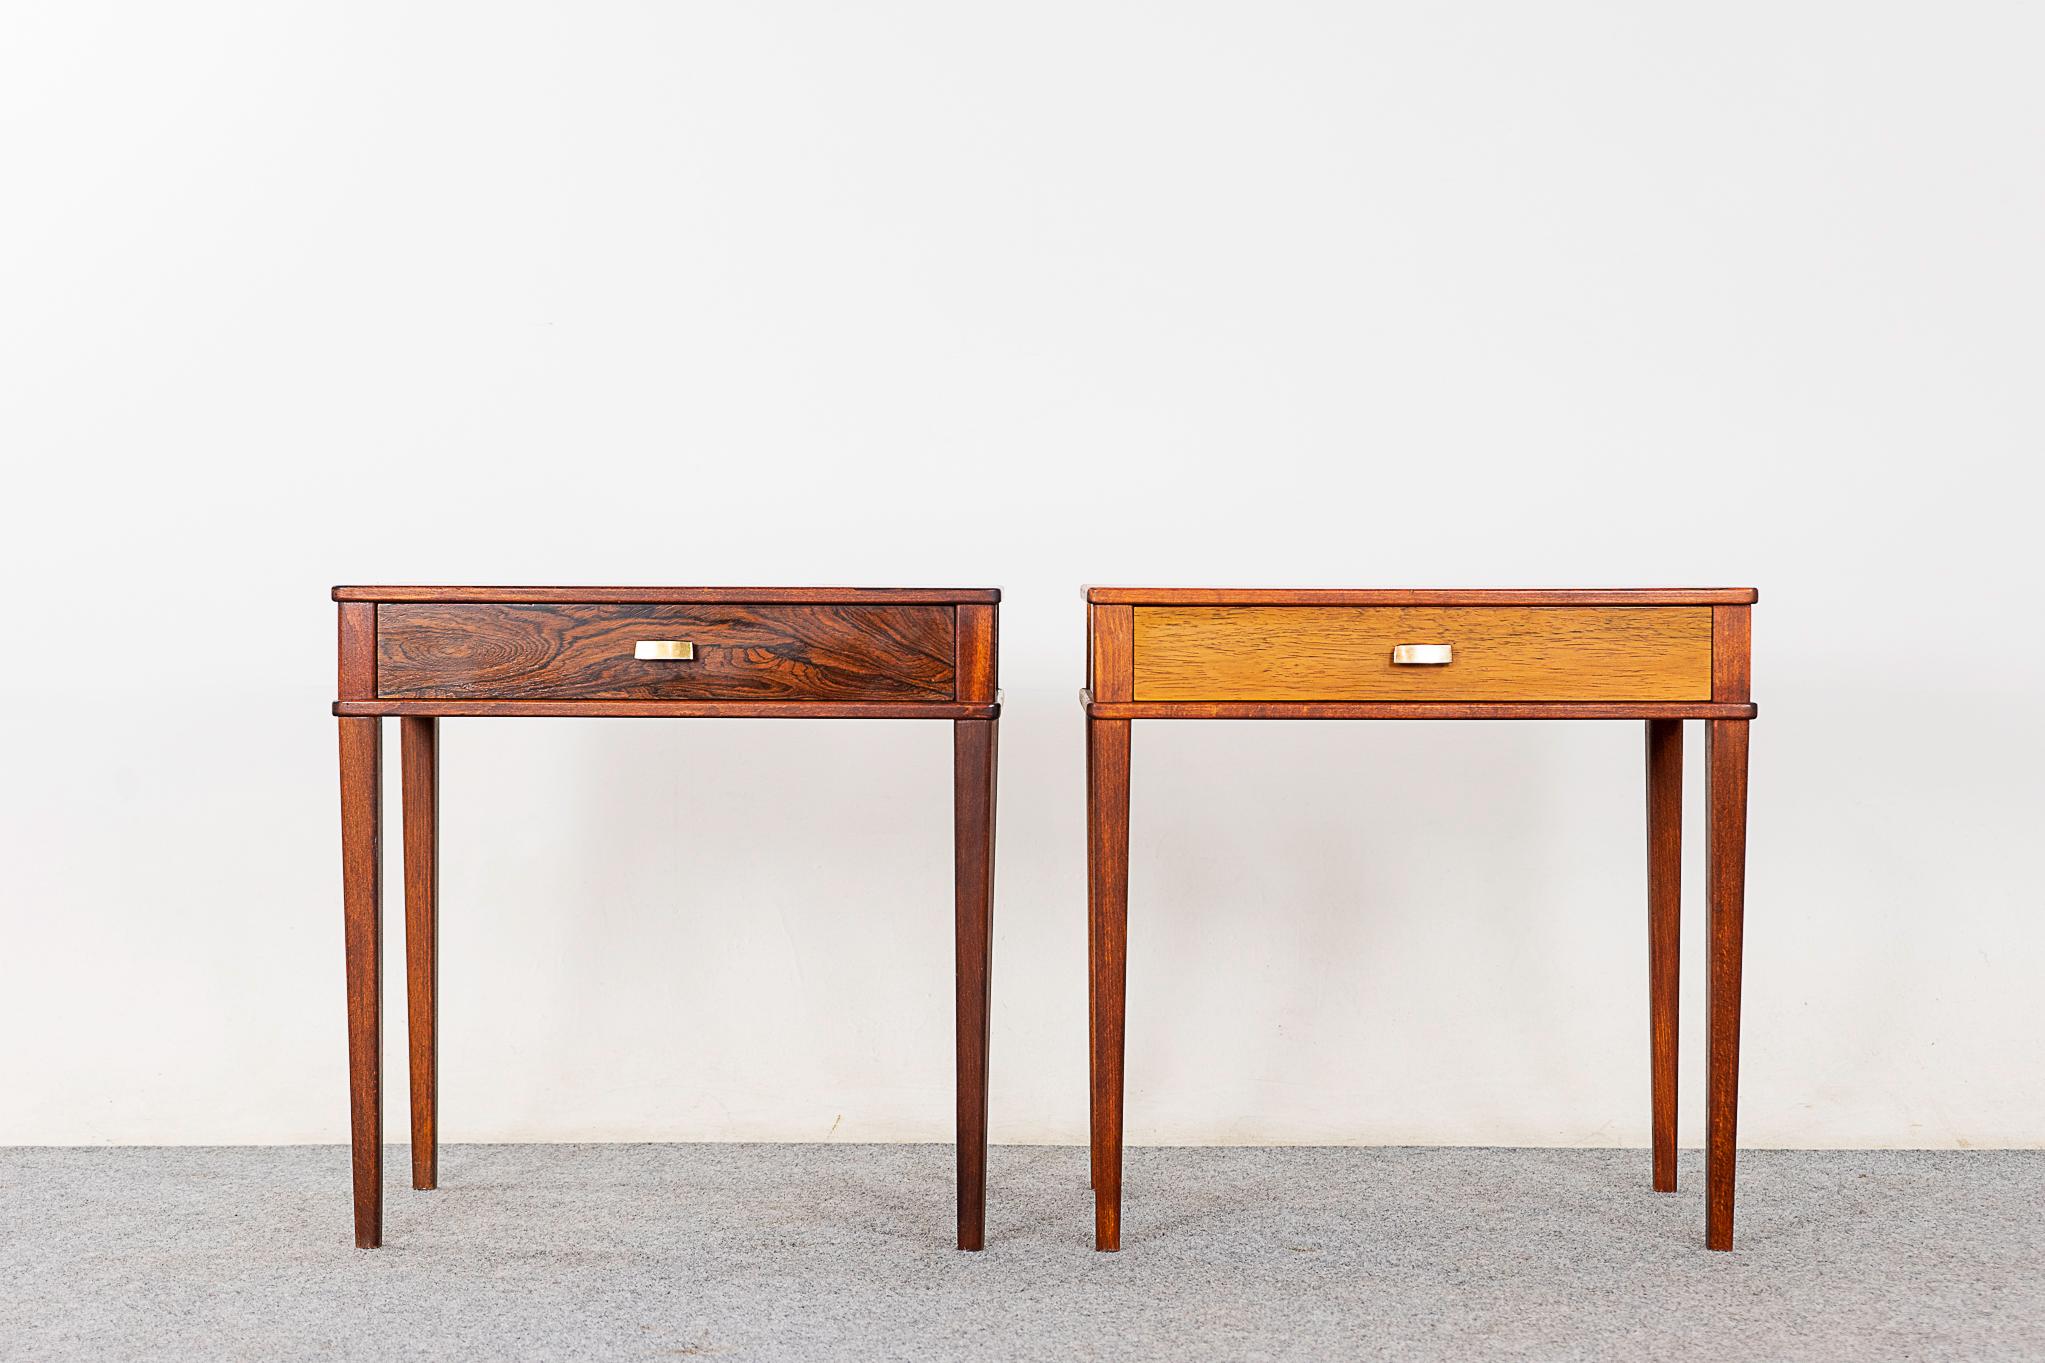 Rosewood mid-century bedside pair, circa 1960's. Veneered case on slender legs, sleek drawer and contrasting metal pulls!

Please inquire for remote and international shipping rates.